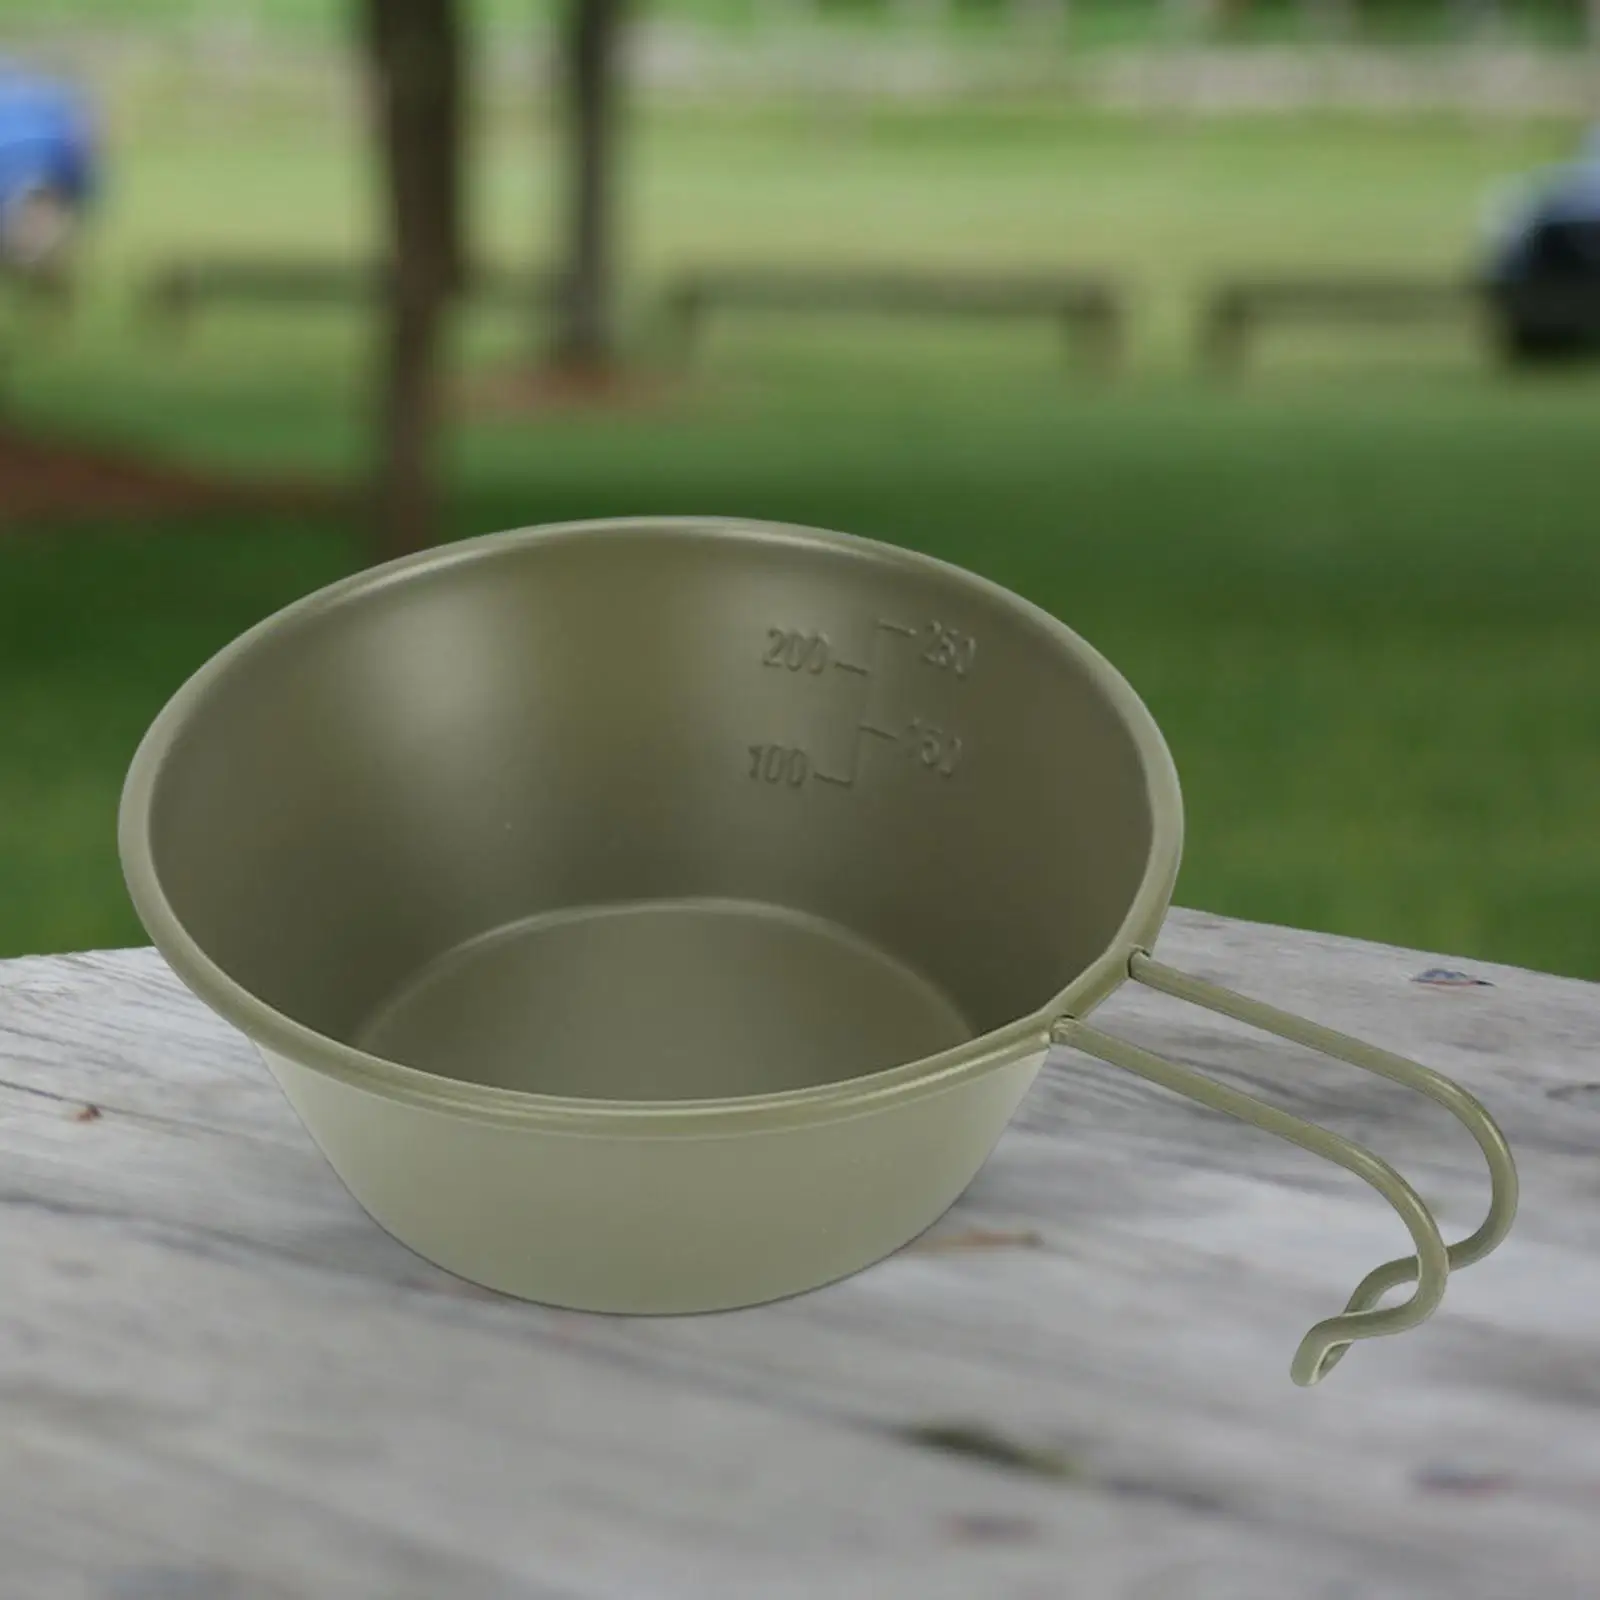 Stainless Steel Camping Bowl Outdoor Dinnerware Portable for Kitchen Picnic